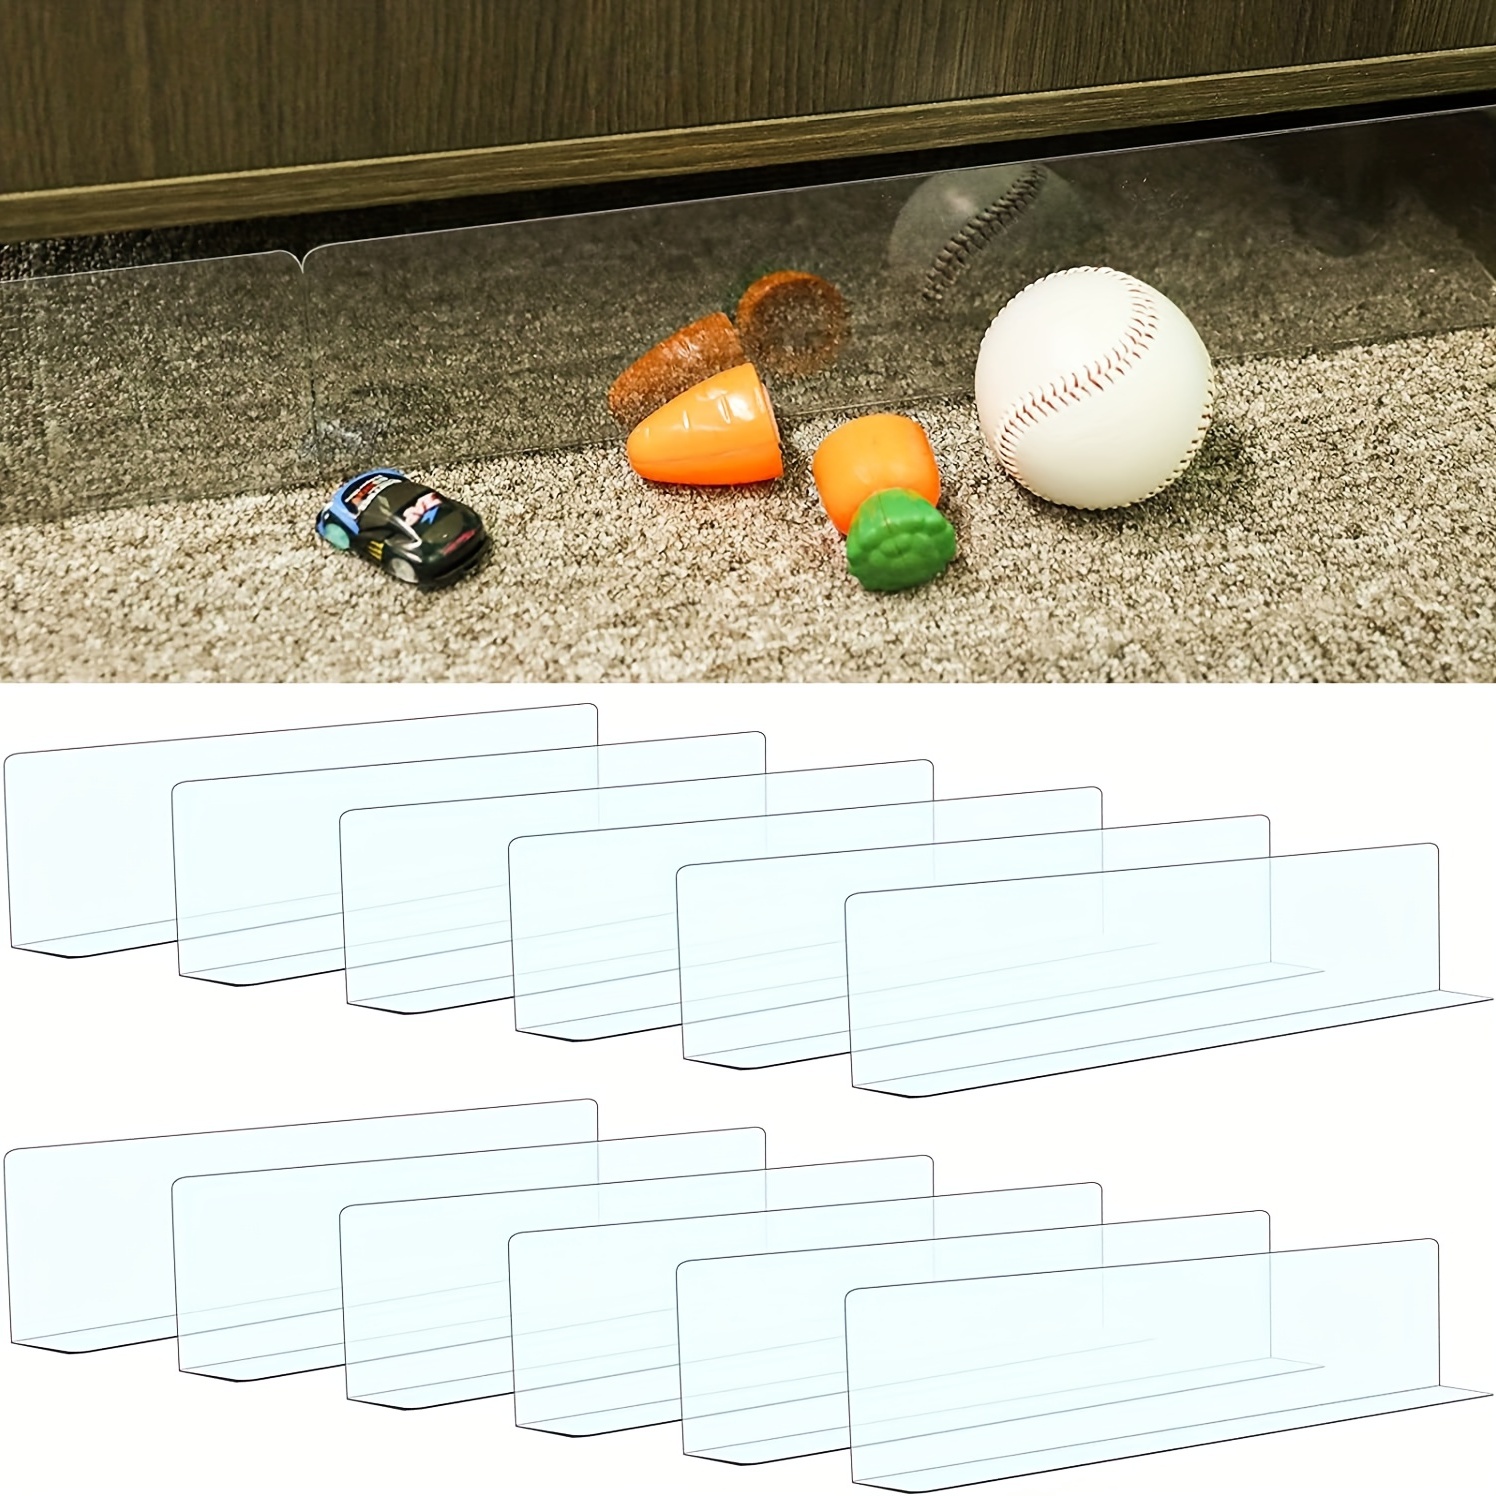  Toy Blocker for Under Couch, Under Bed Blocker for